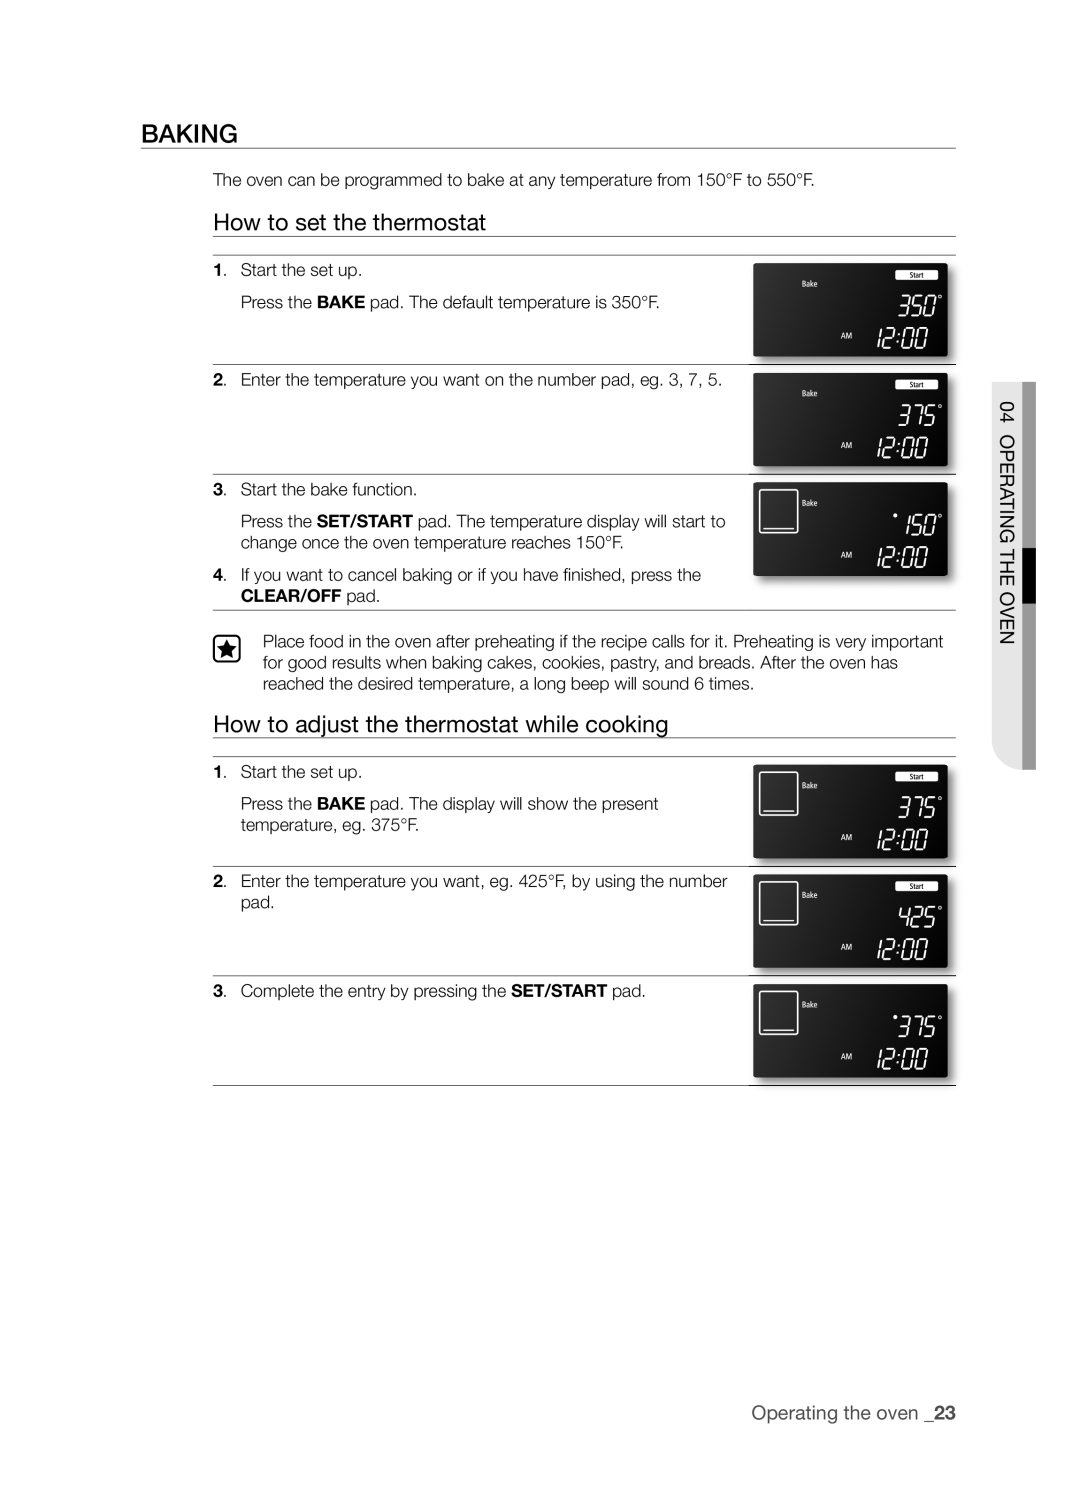 Samsung FTQ386LWUX Baking, How to set the thermostat, How to adjust the thermostat while cooking, Operating the oven 2 